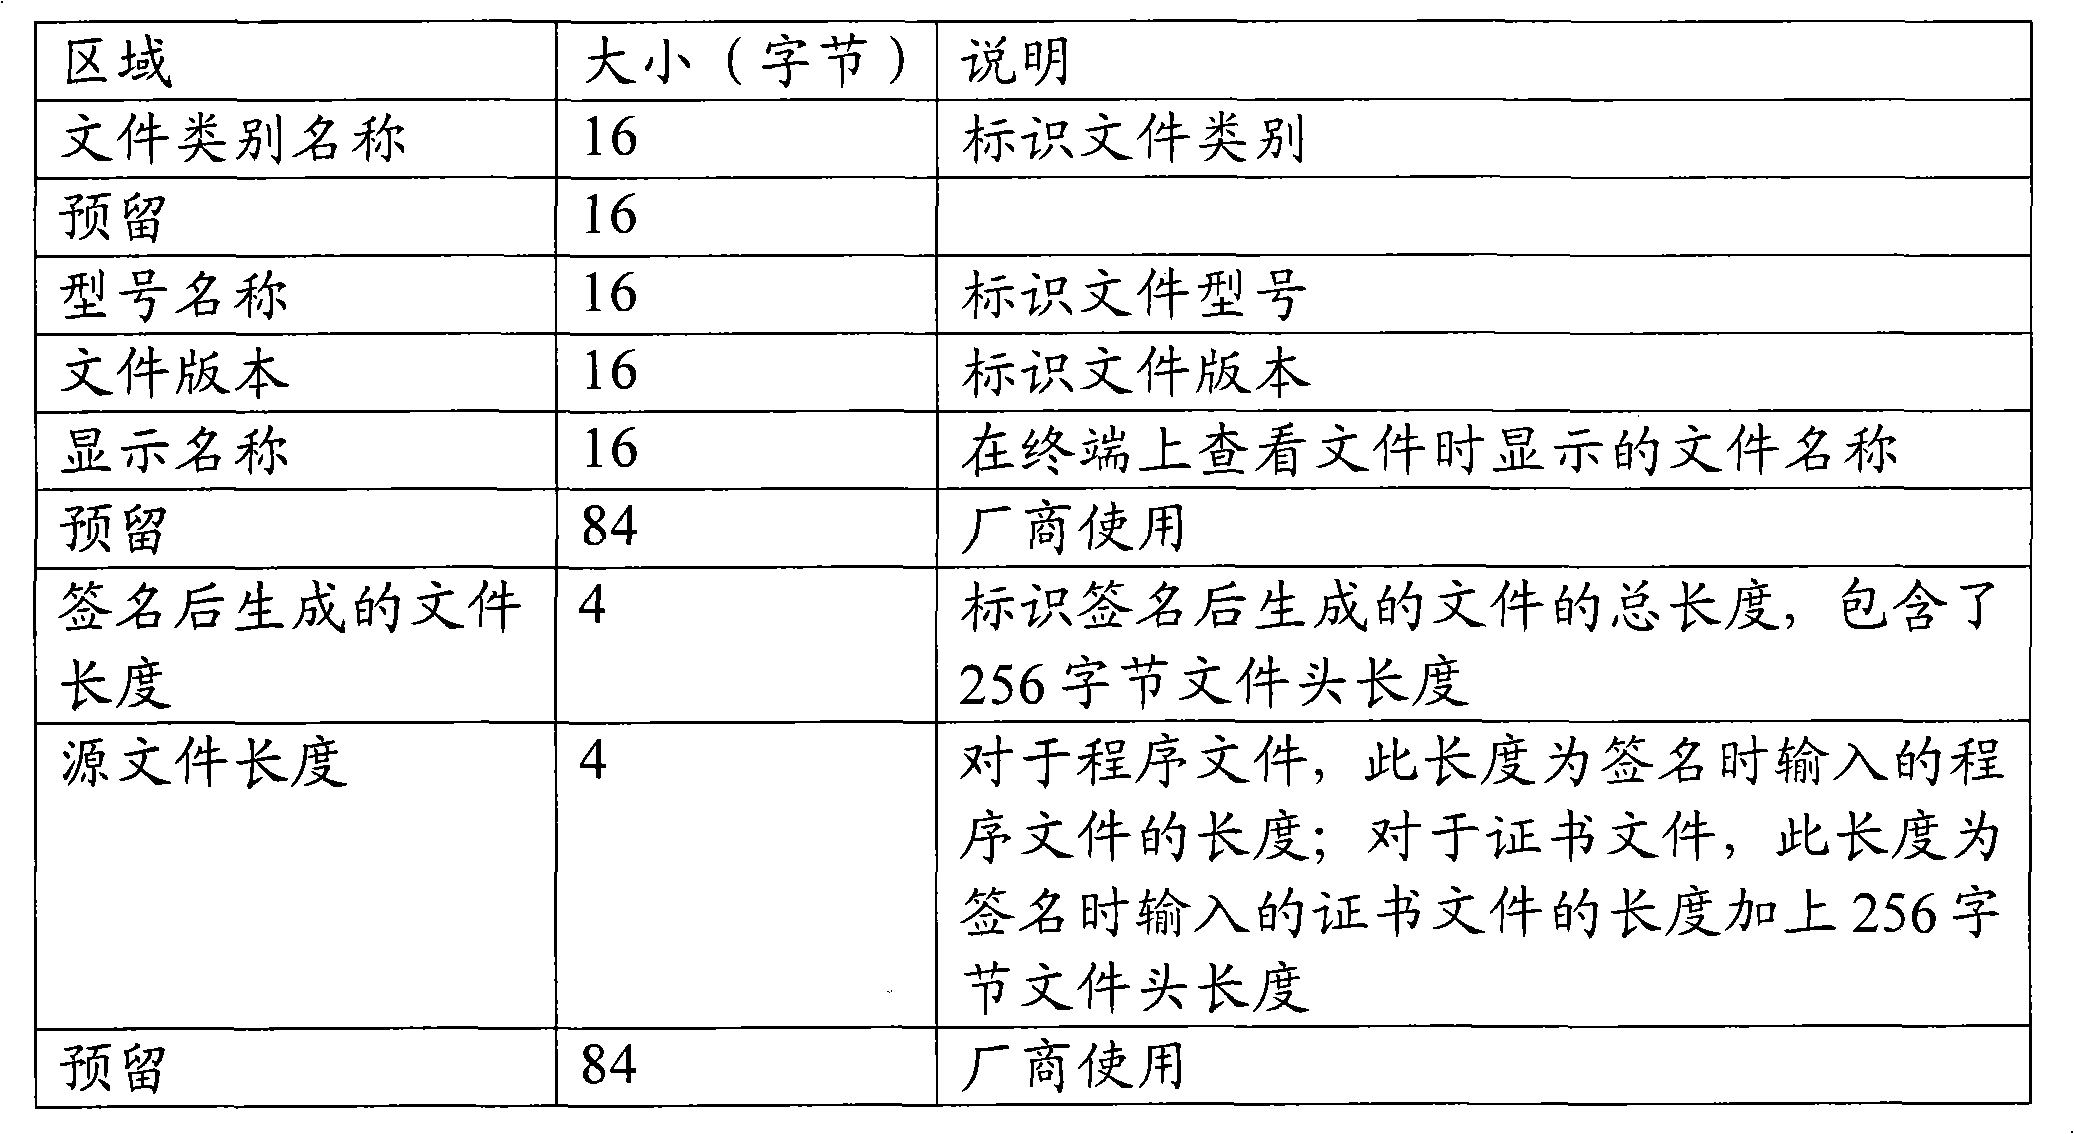 Method for authenticating point of sail (POS) file and method for maintaining authentication certificate